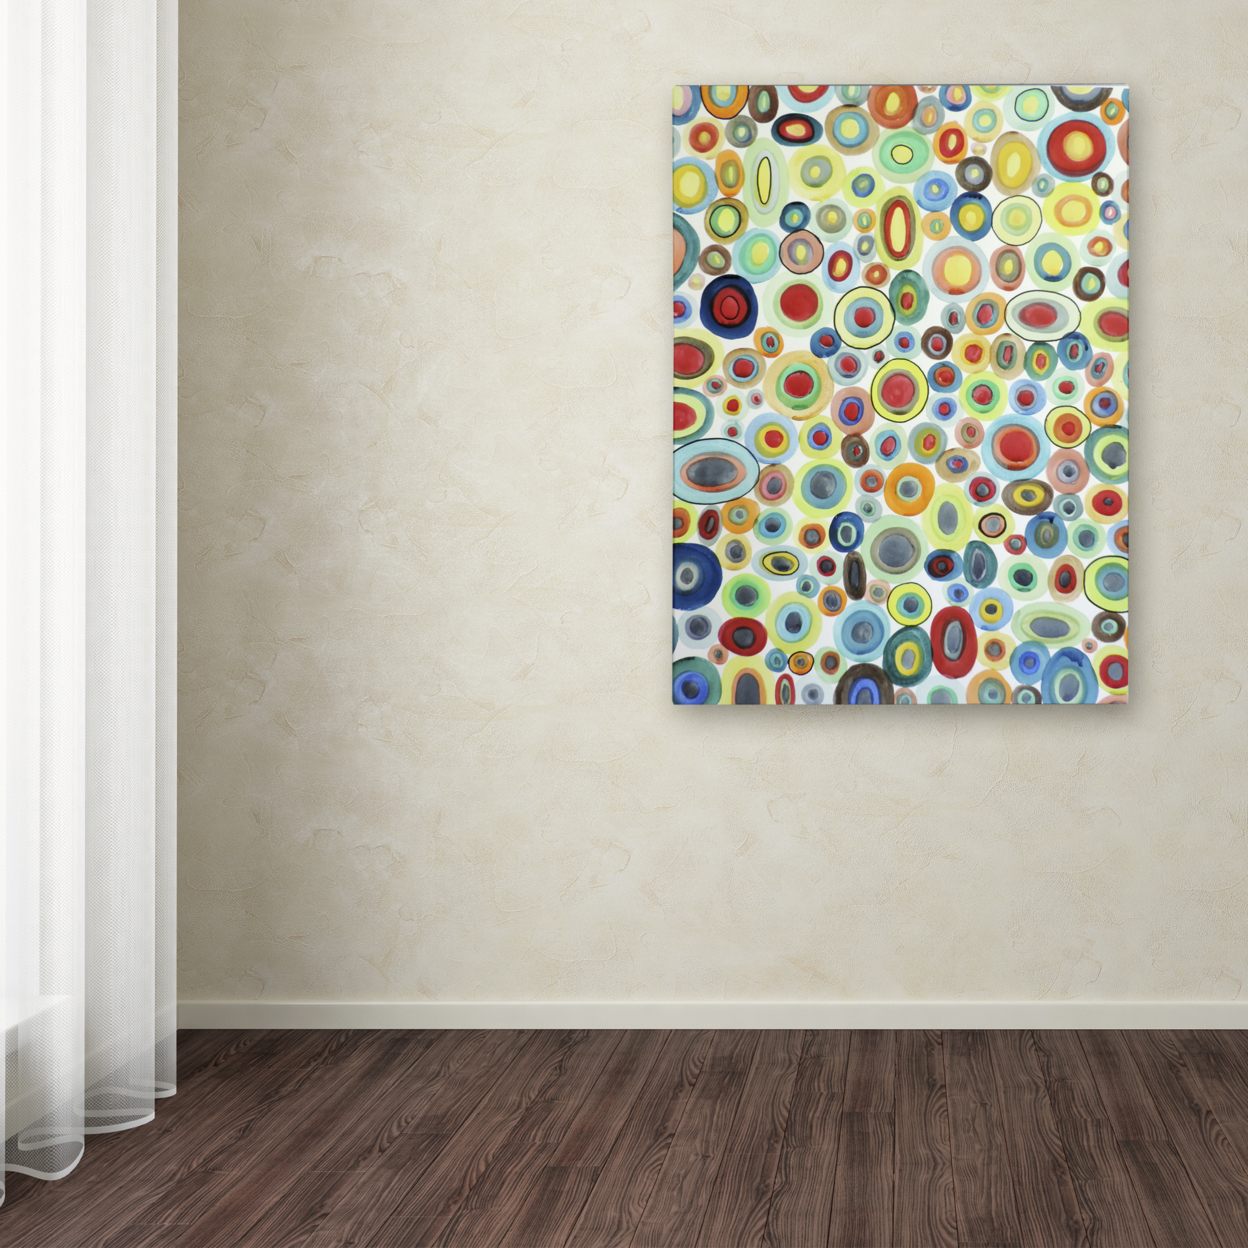 Sylvie Demers 'Viva' Canvas Wall Art 35 X 47 Inches